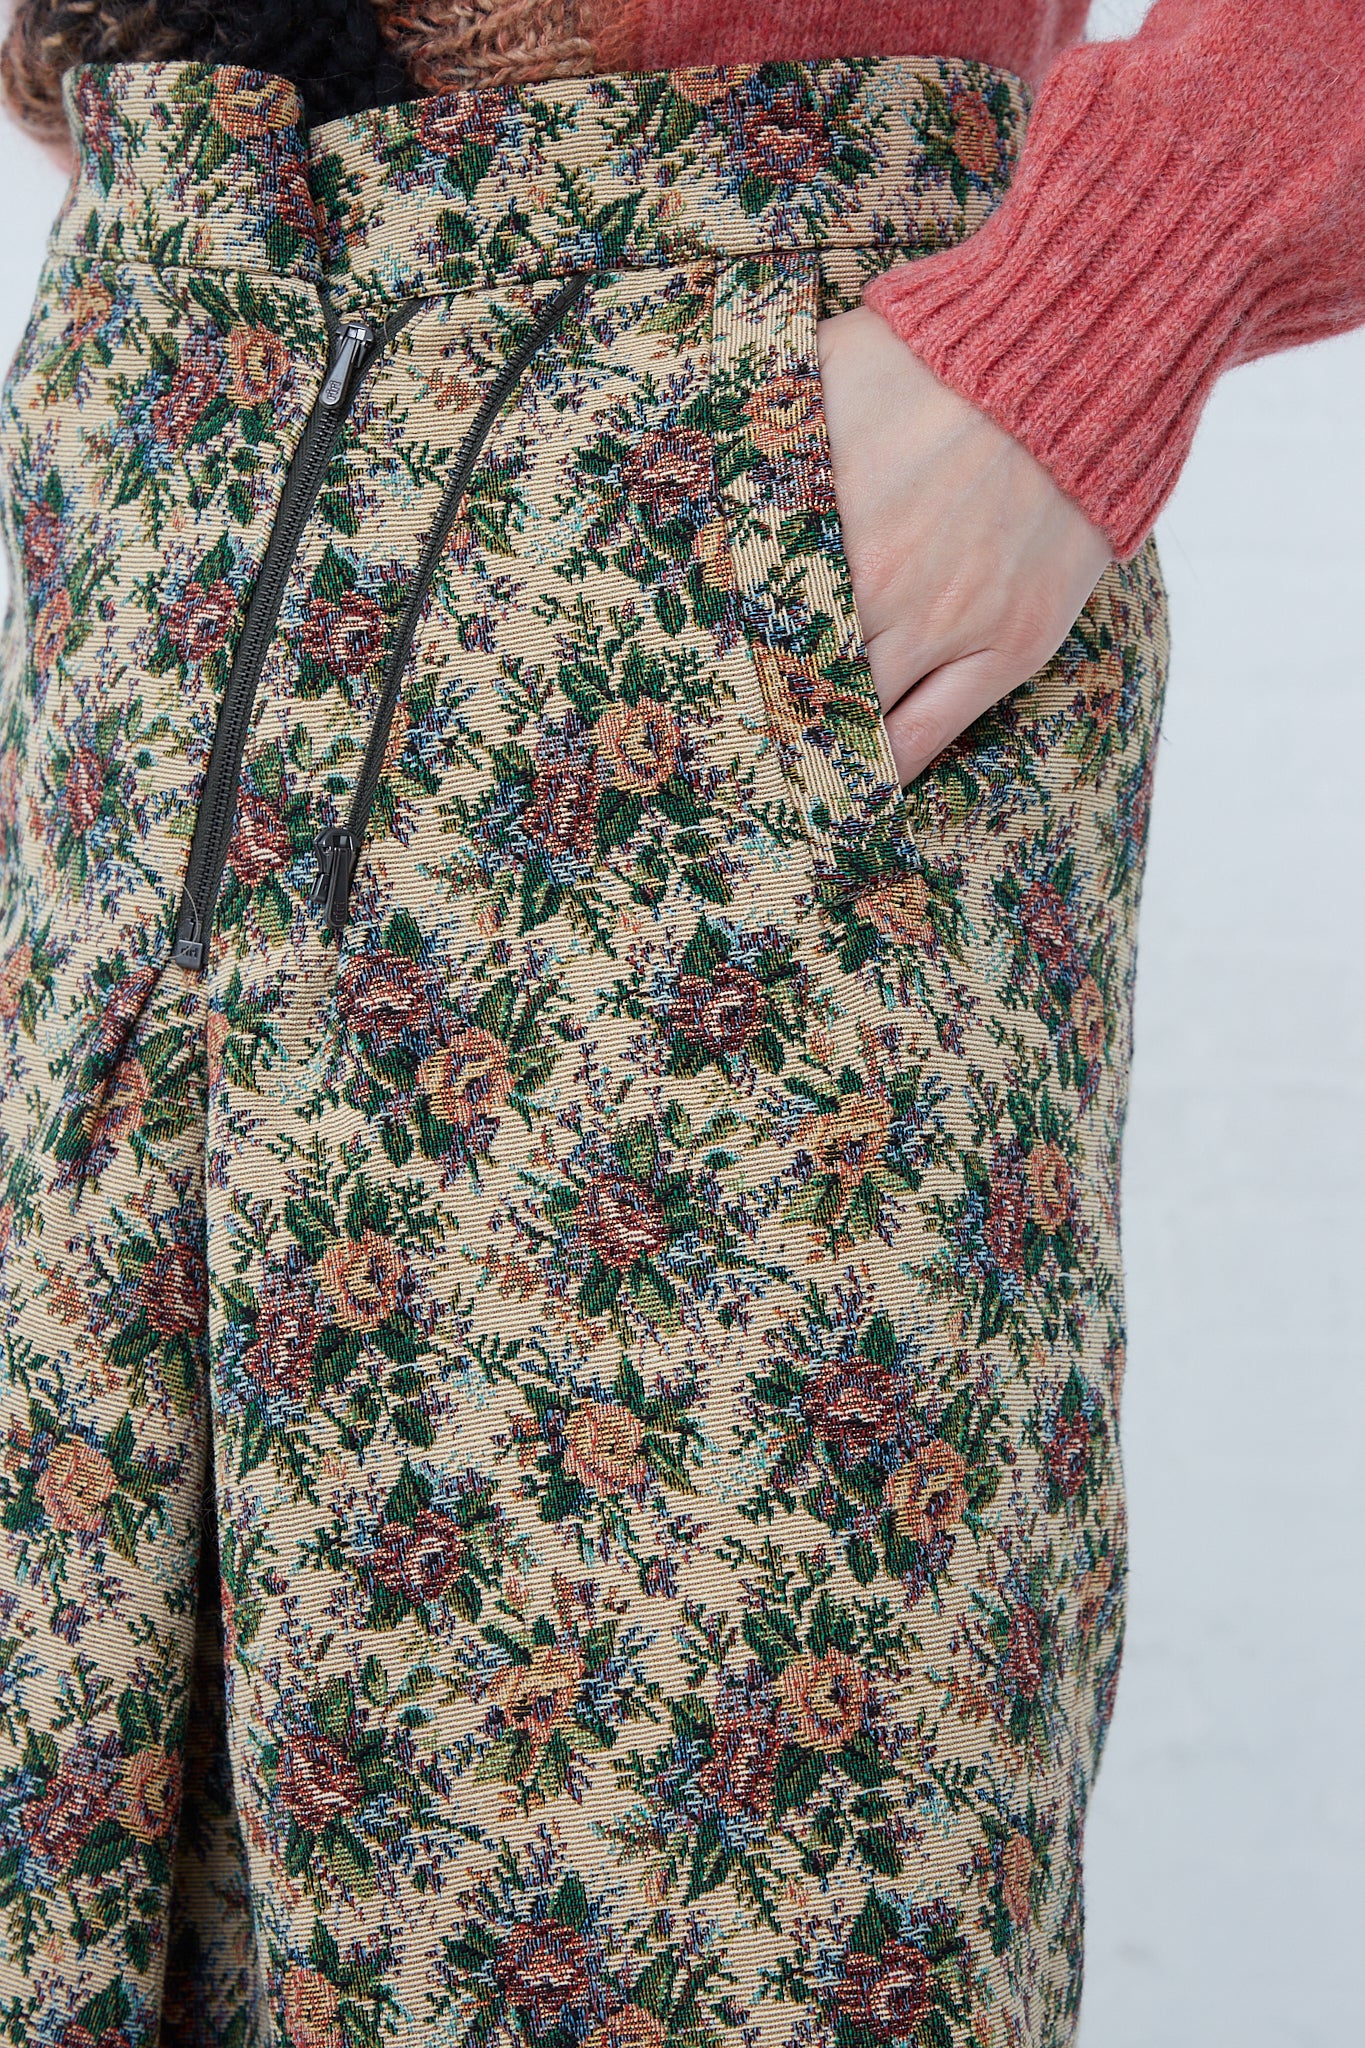 A woman is wearing a Bless SMLXL Skirt No. 75 in Flower made from a brocade cotton blend.